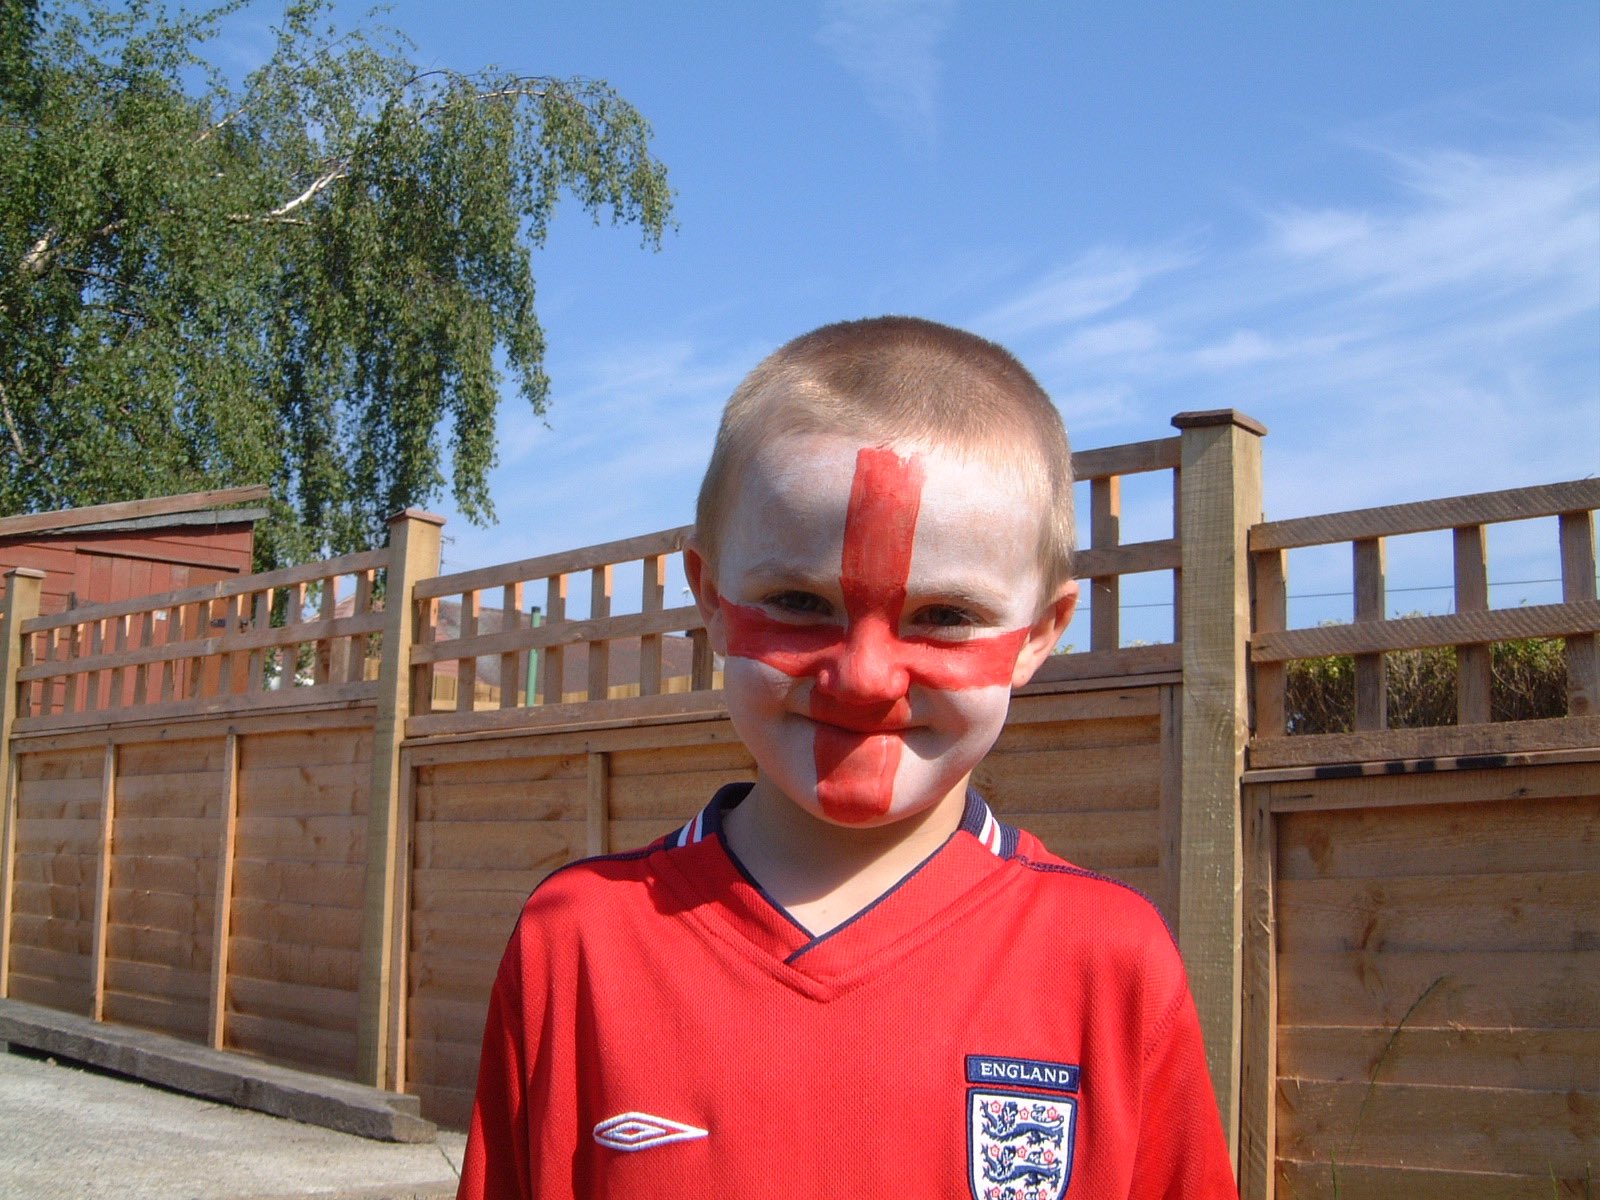 You Gotta Support The Team!, The Face Painter